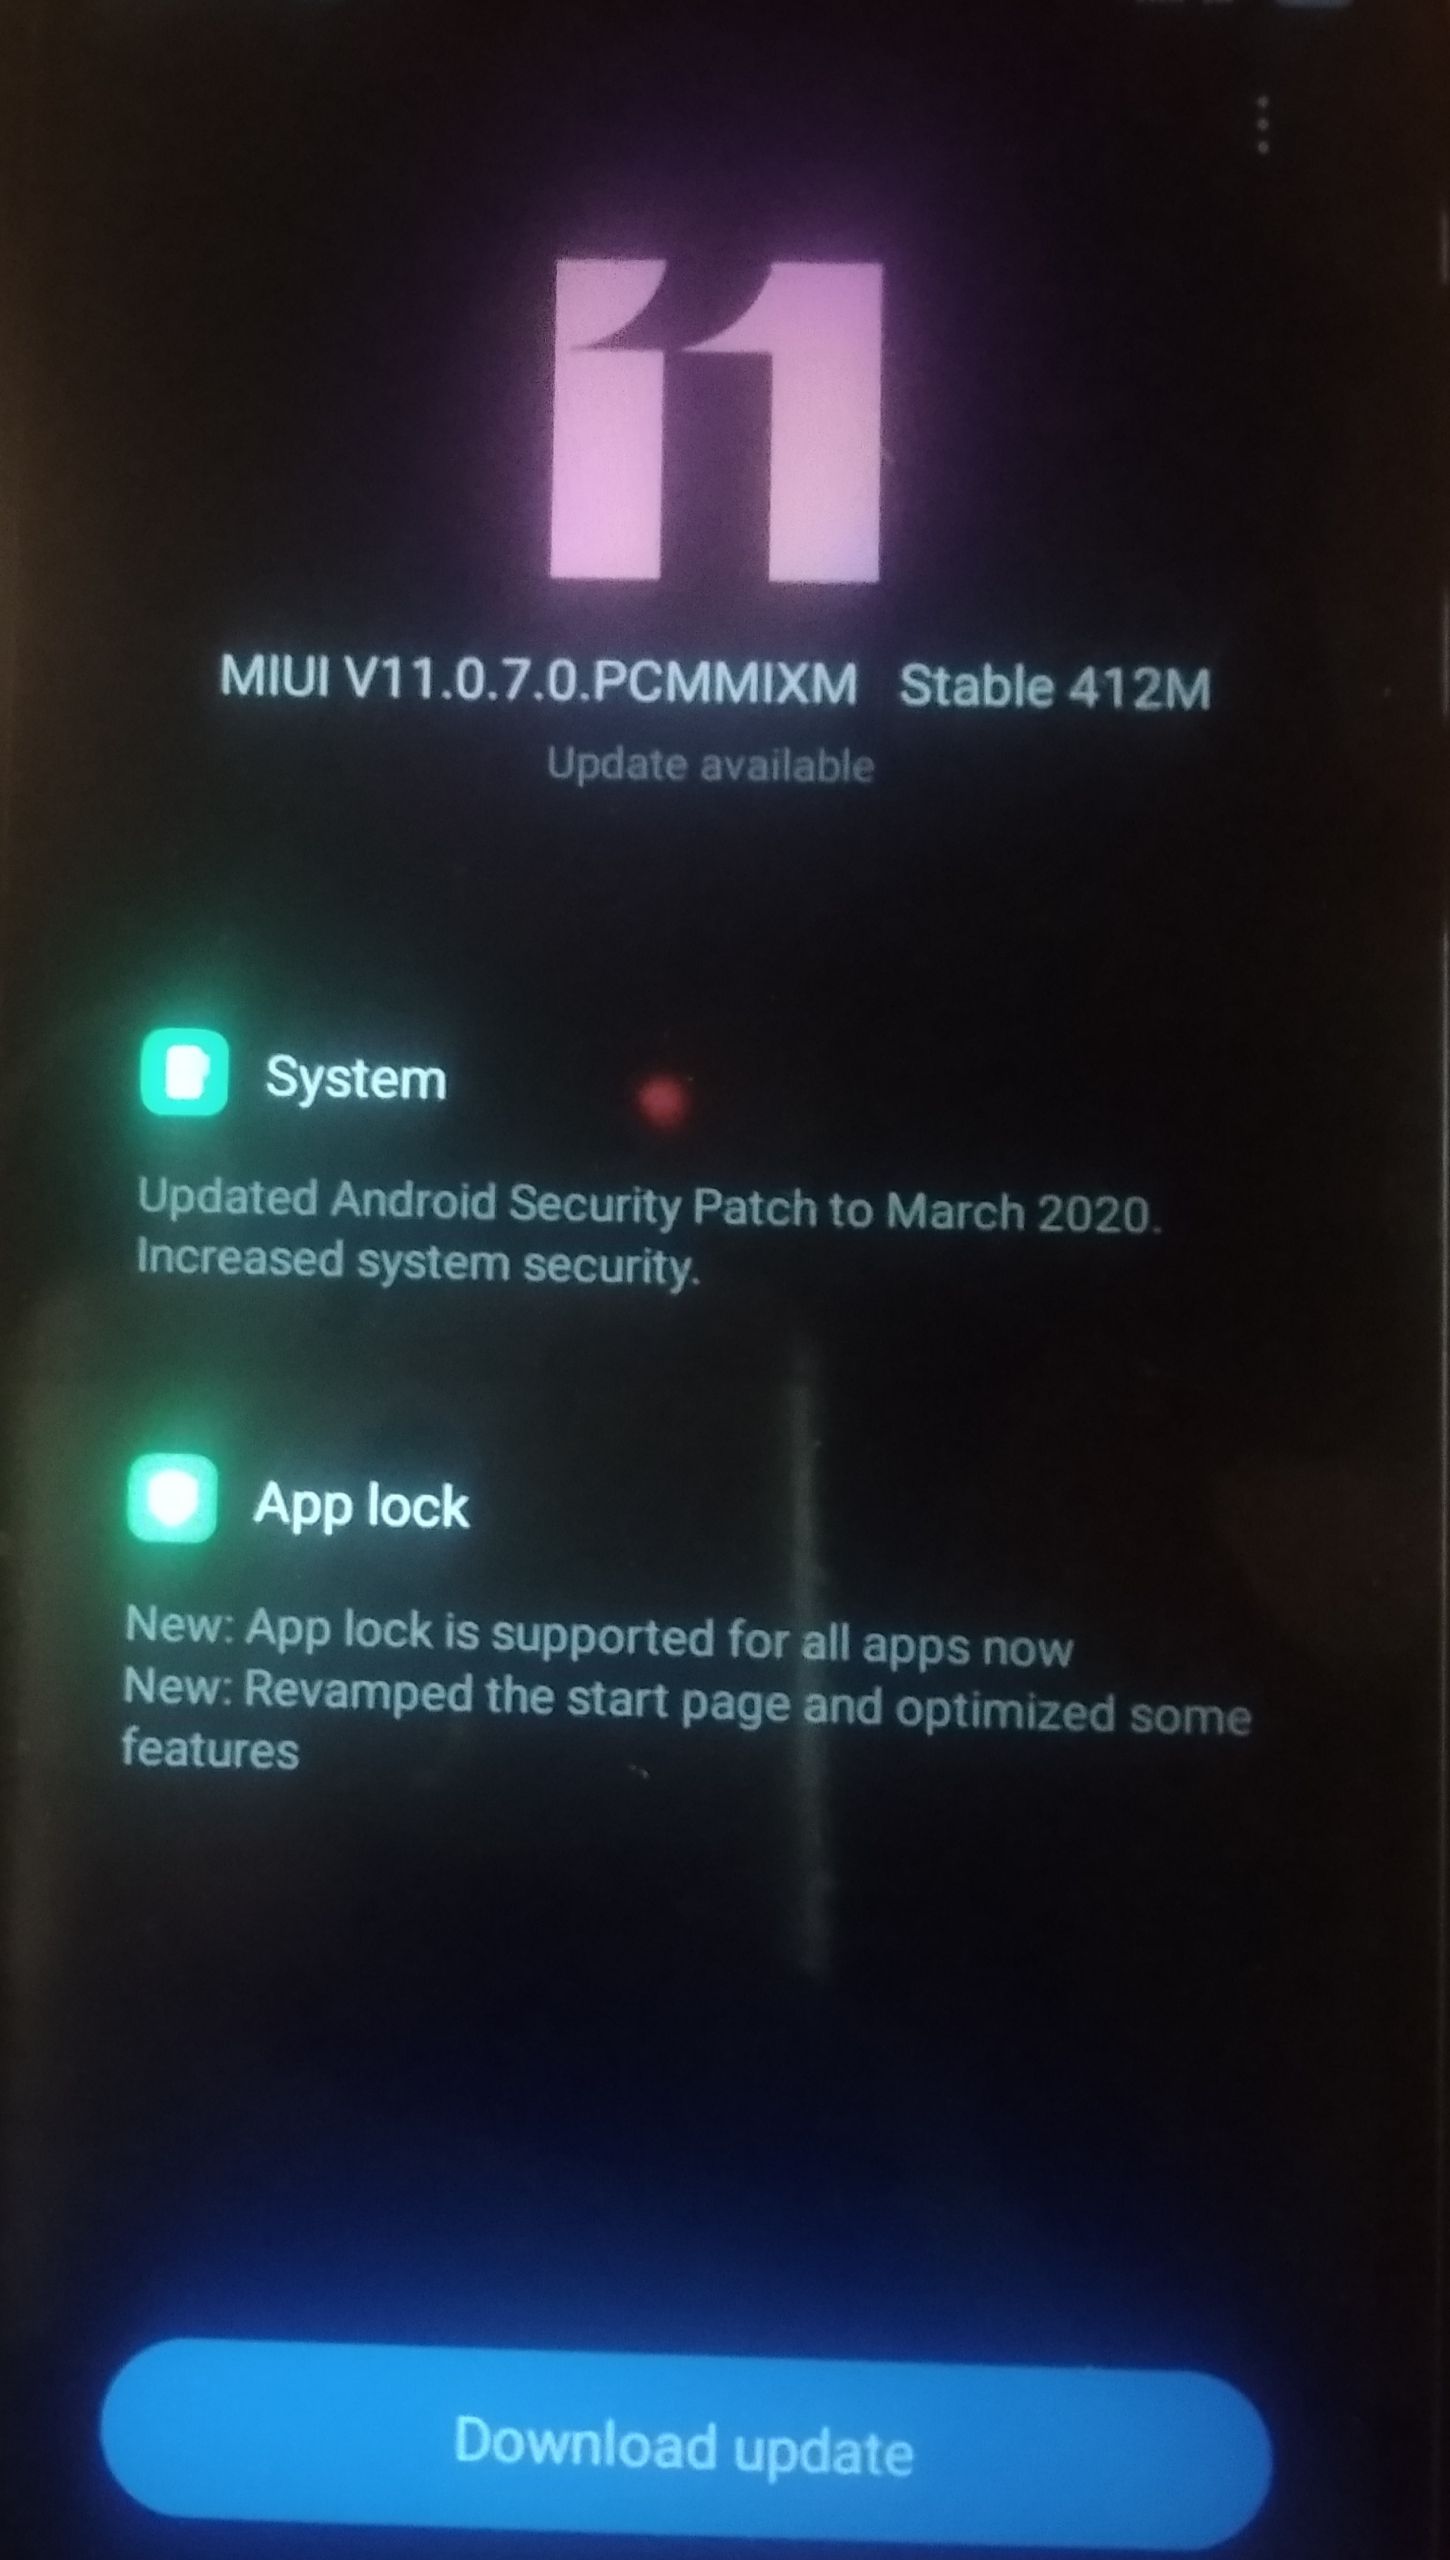 New Redmi 7A Global stable update - MIUI 11.0.7.0 PCMMIXM